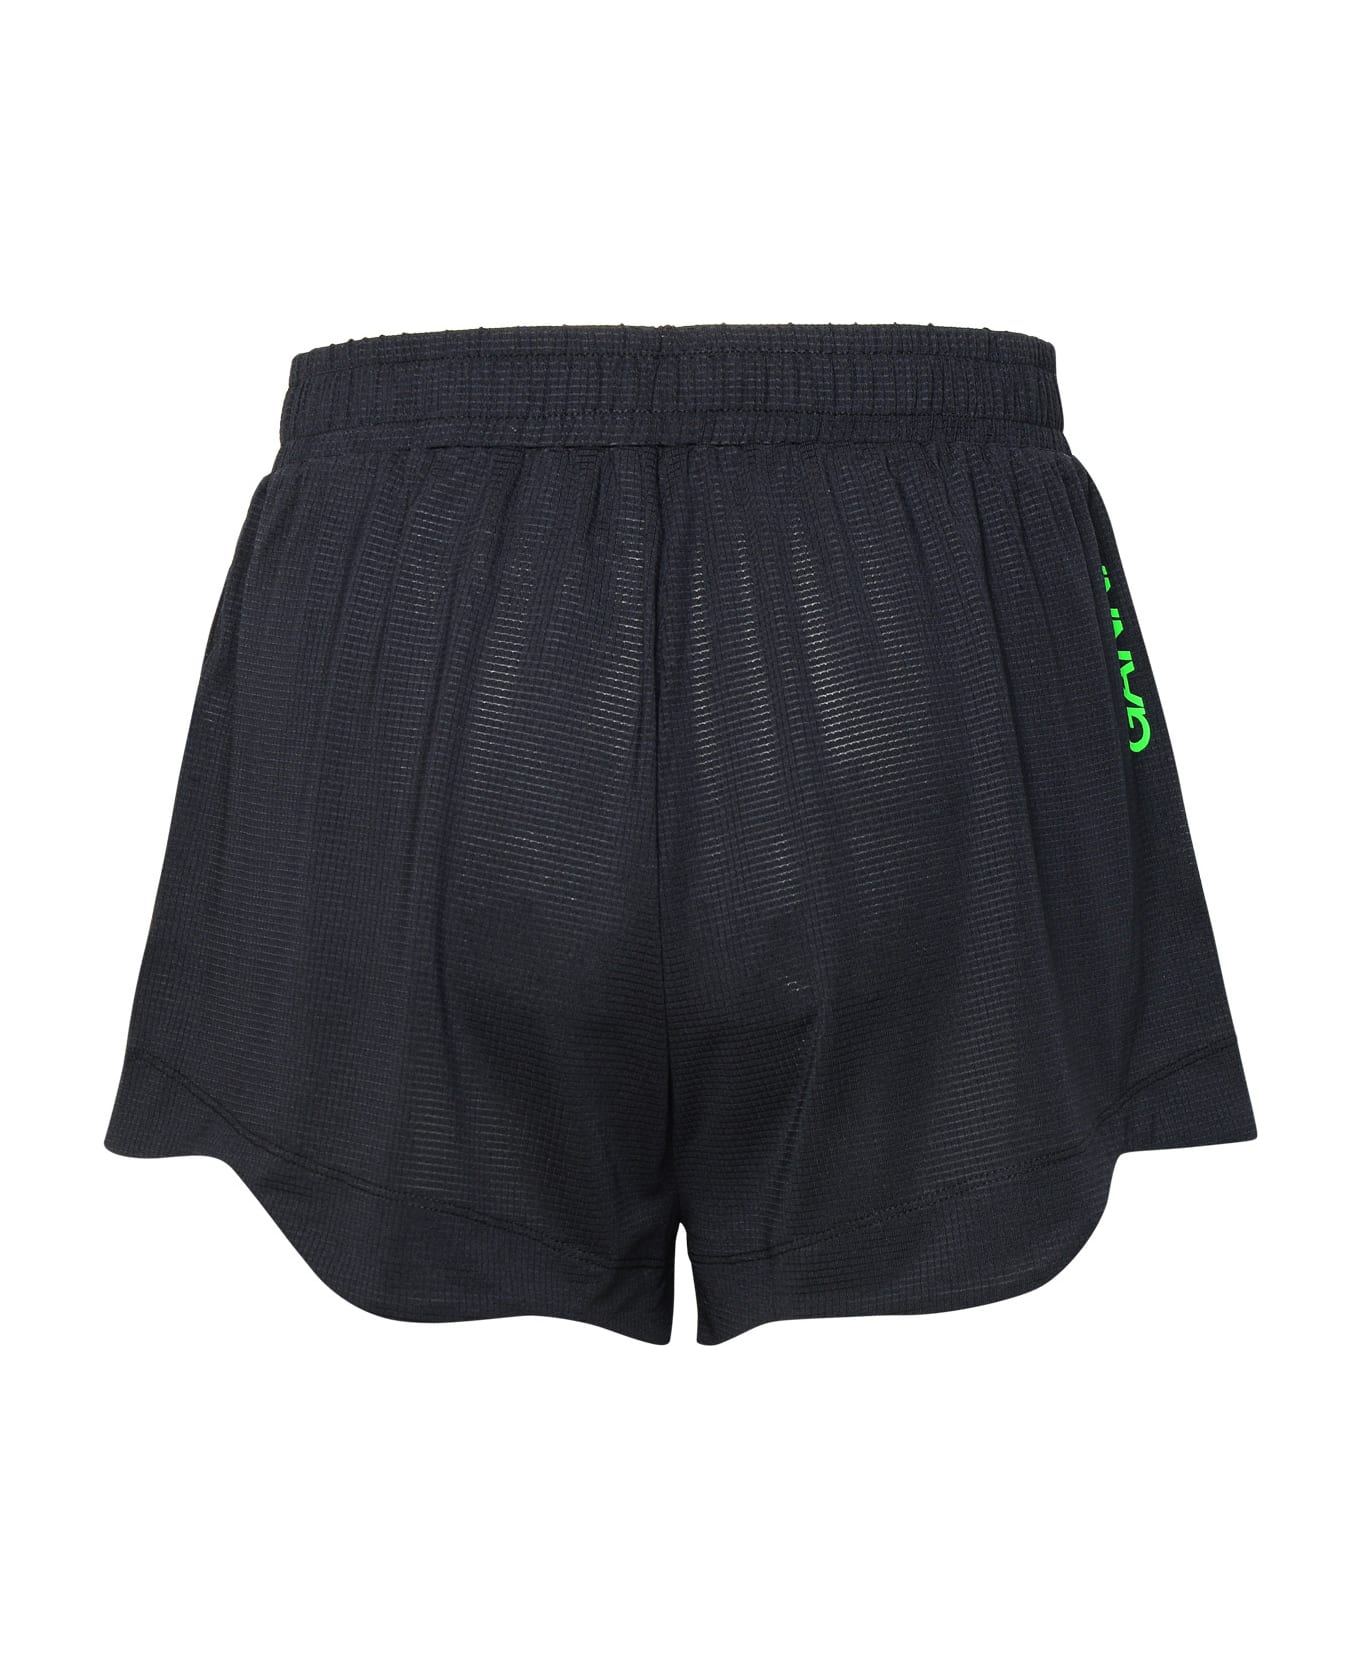 Ganni 'active' Shorts In Black Recycled Polyester Blend - Black